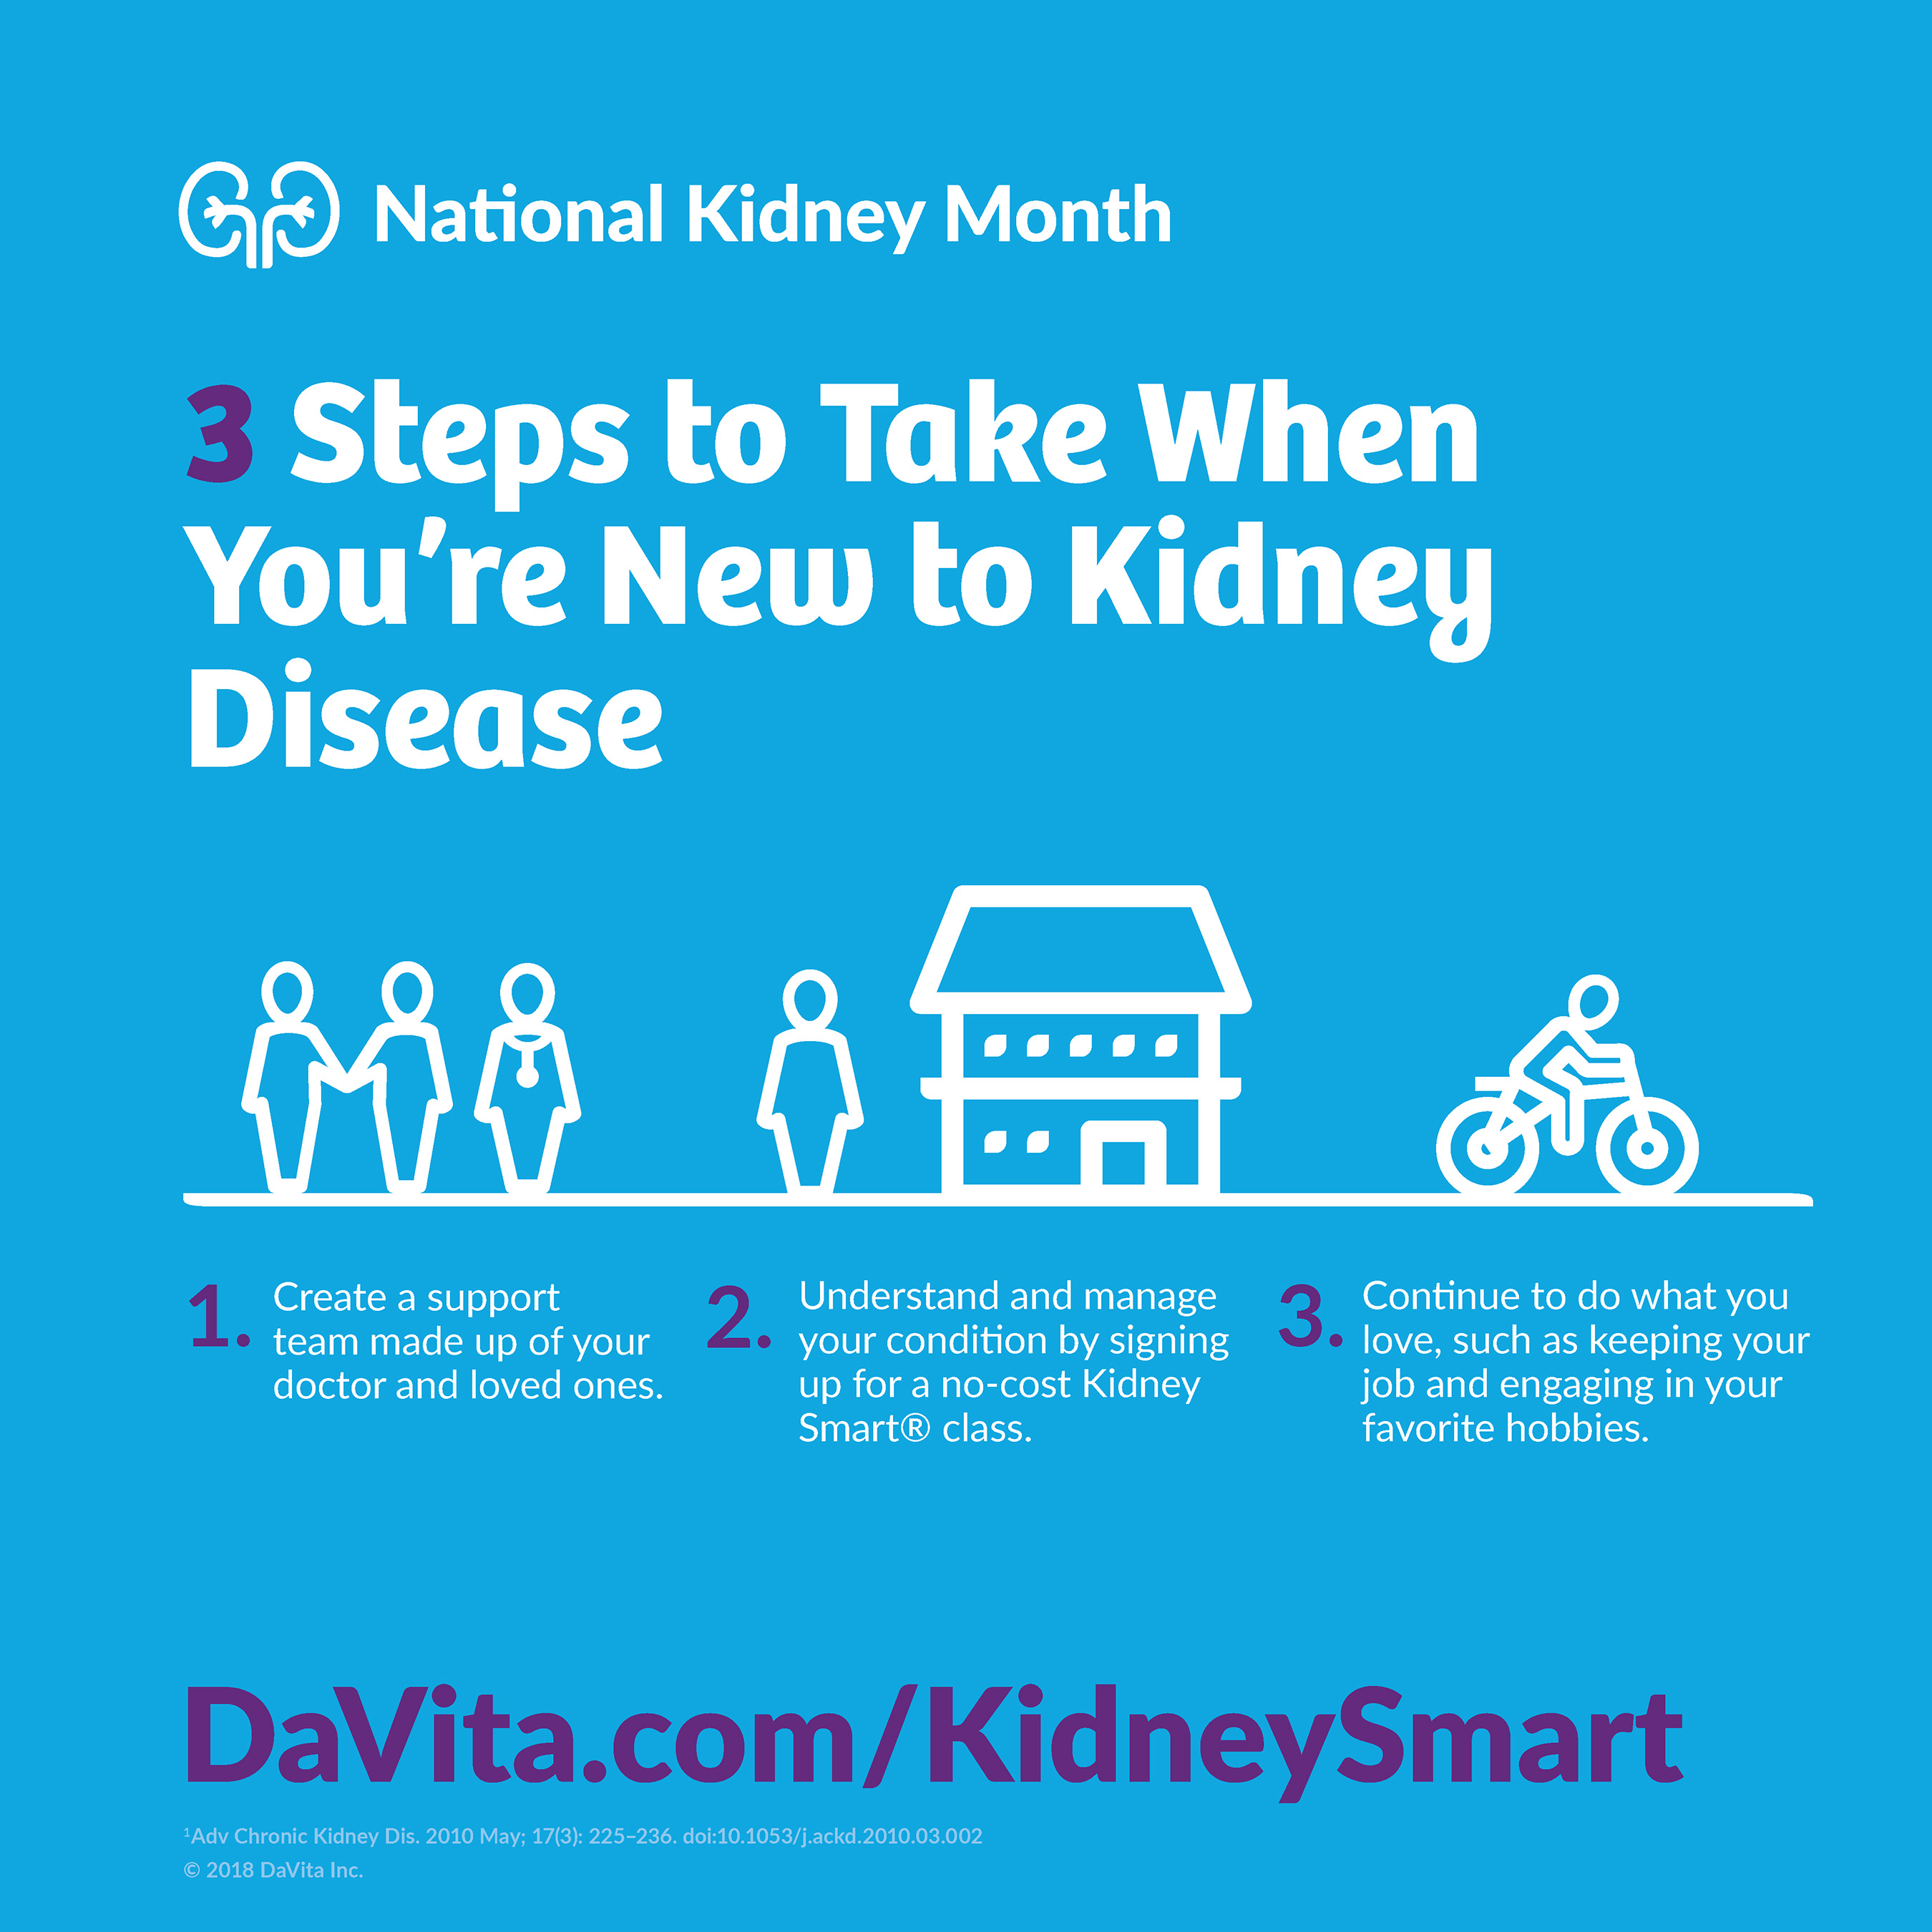 3 steps to take when you're new to kidney disease